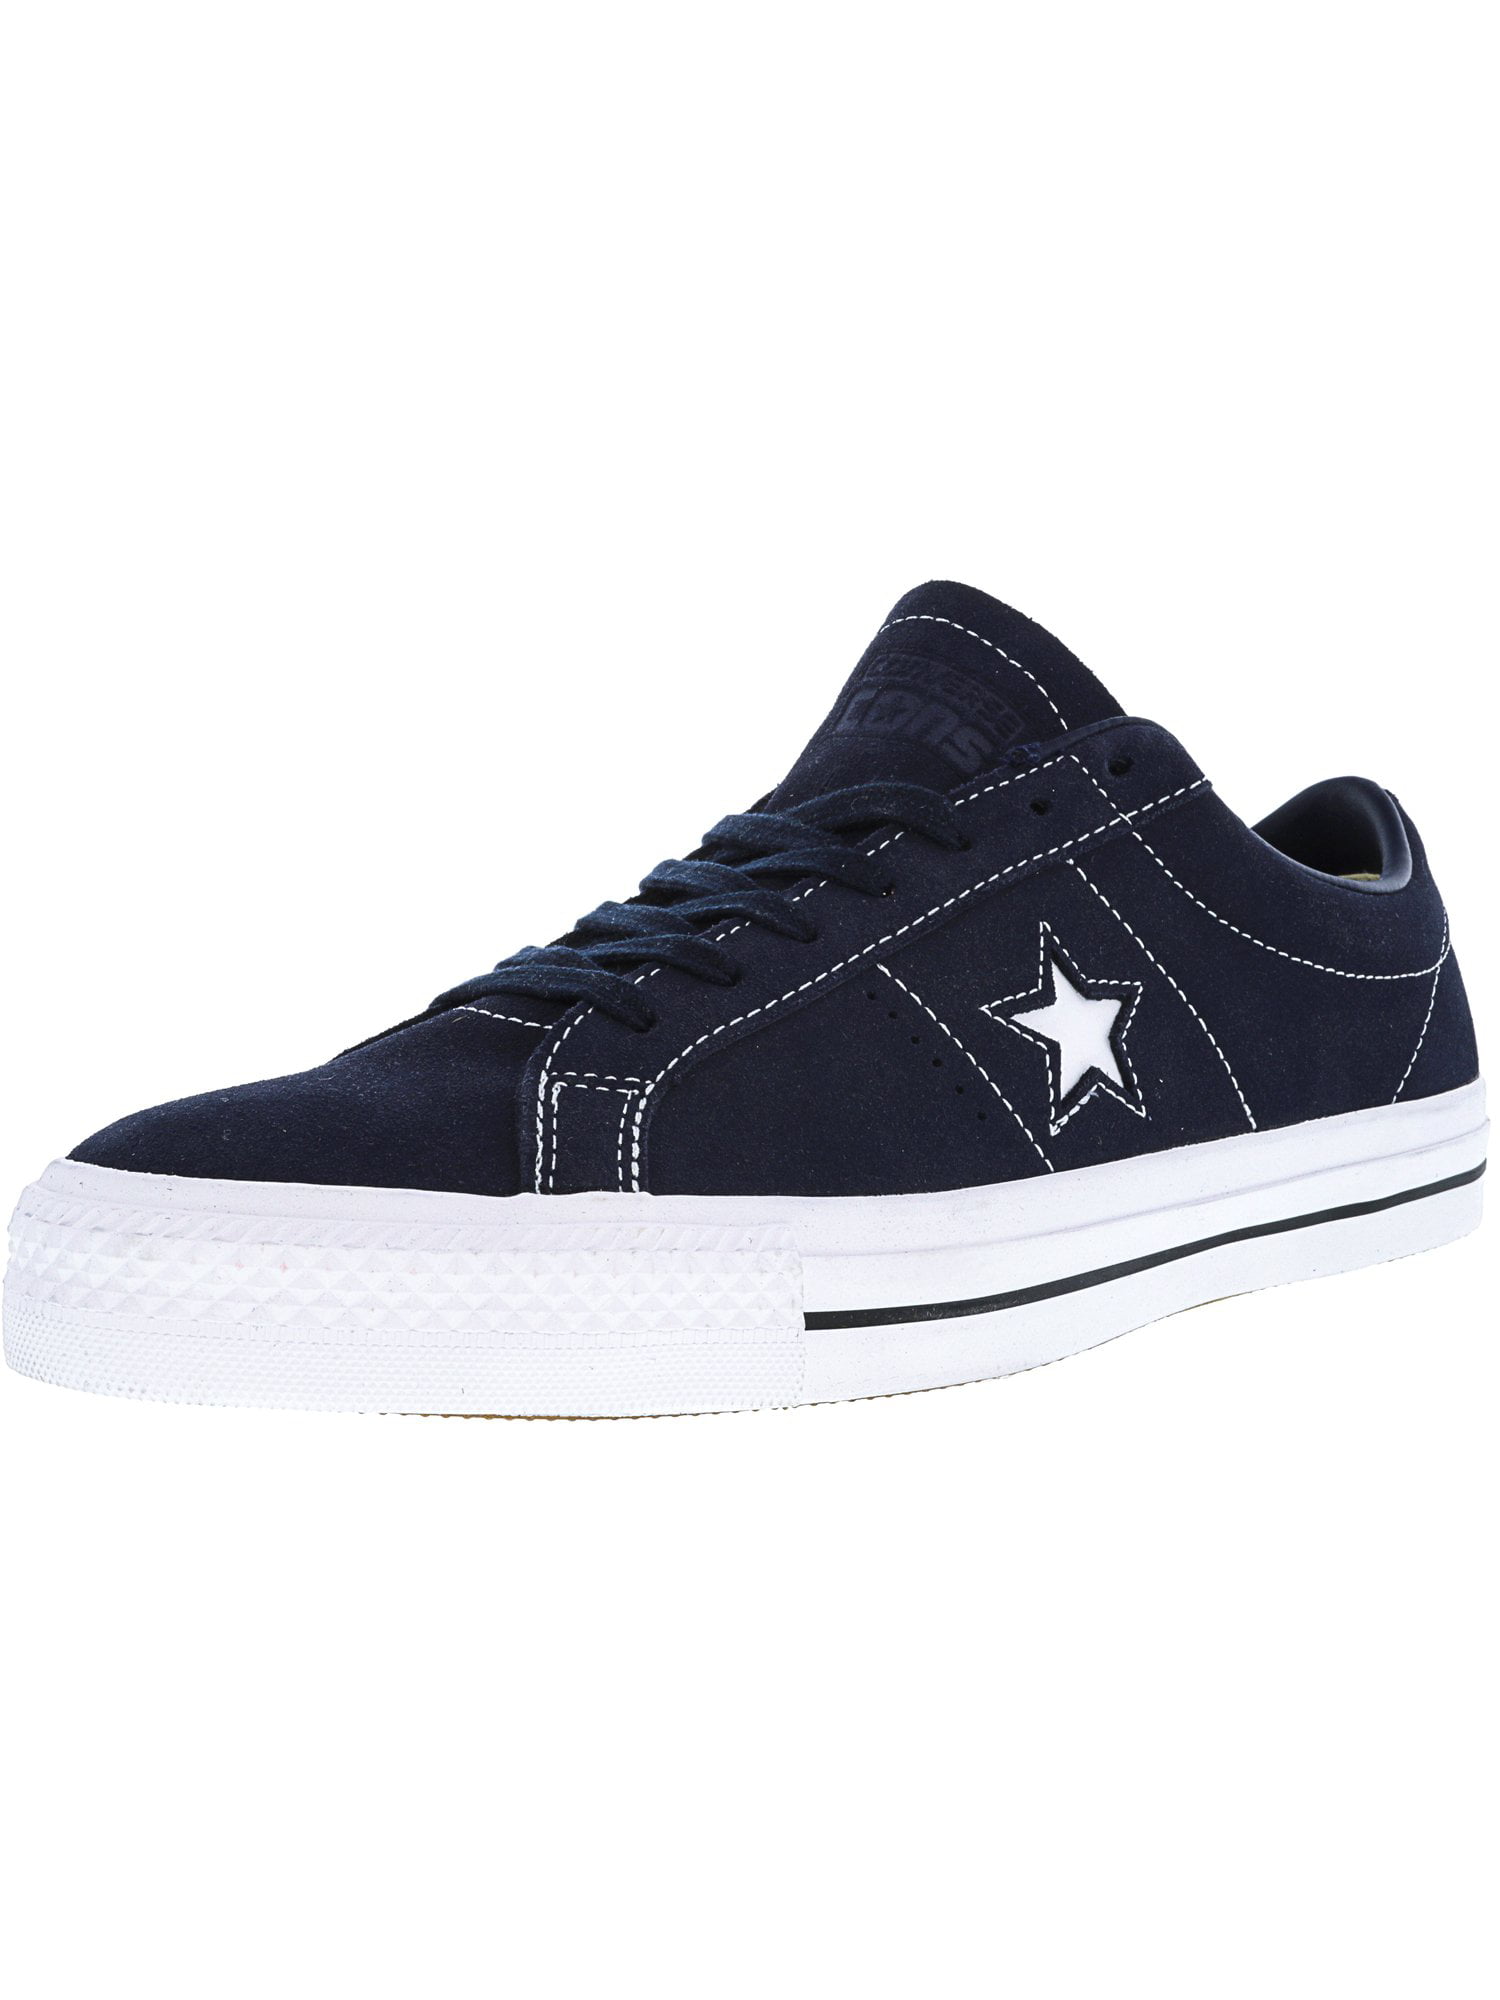 Converse Star Pro Ox Obsidian / White Ankle-High Suede Sneaker - 12.5M 10.5M -